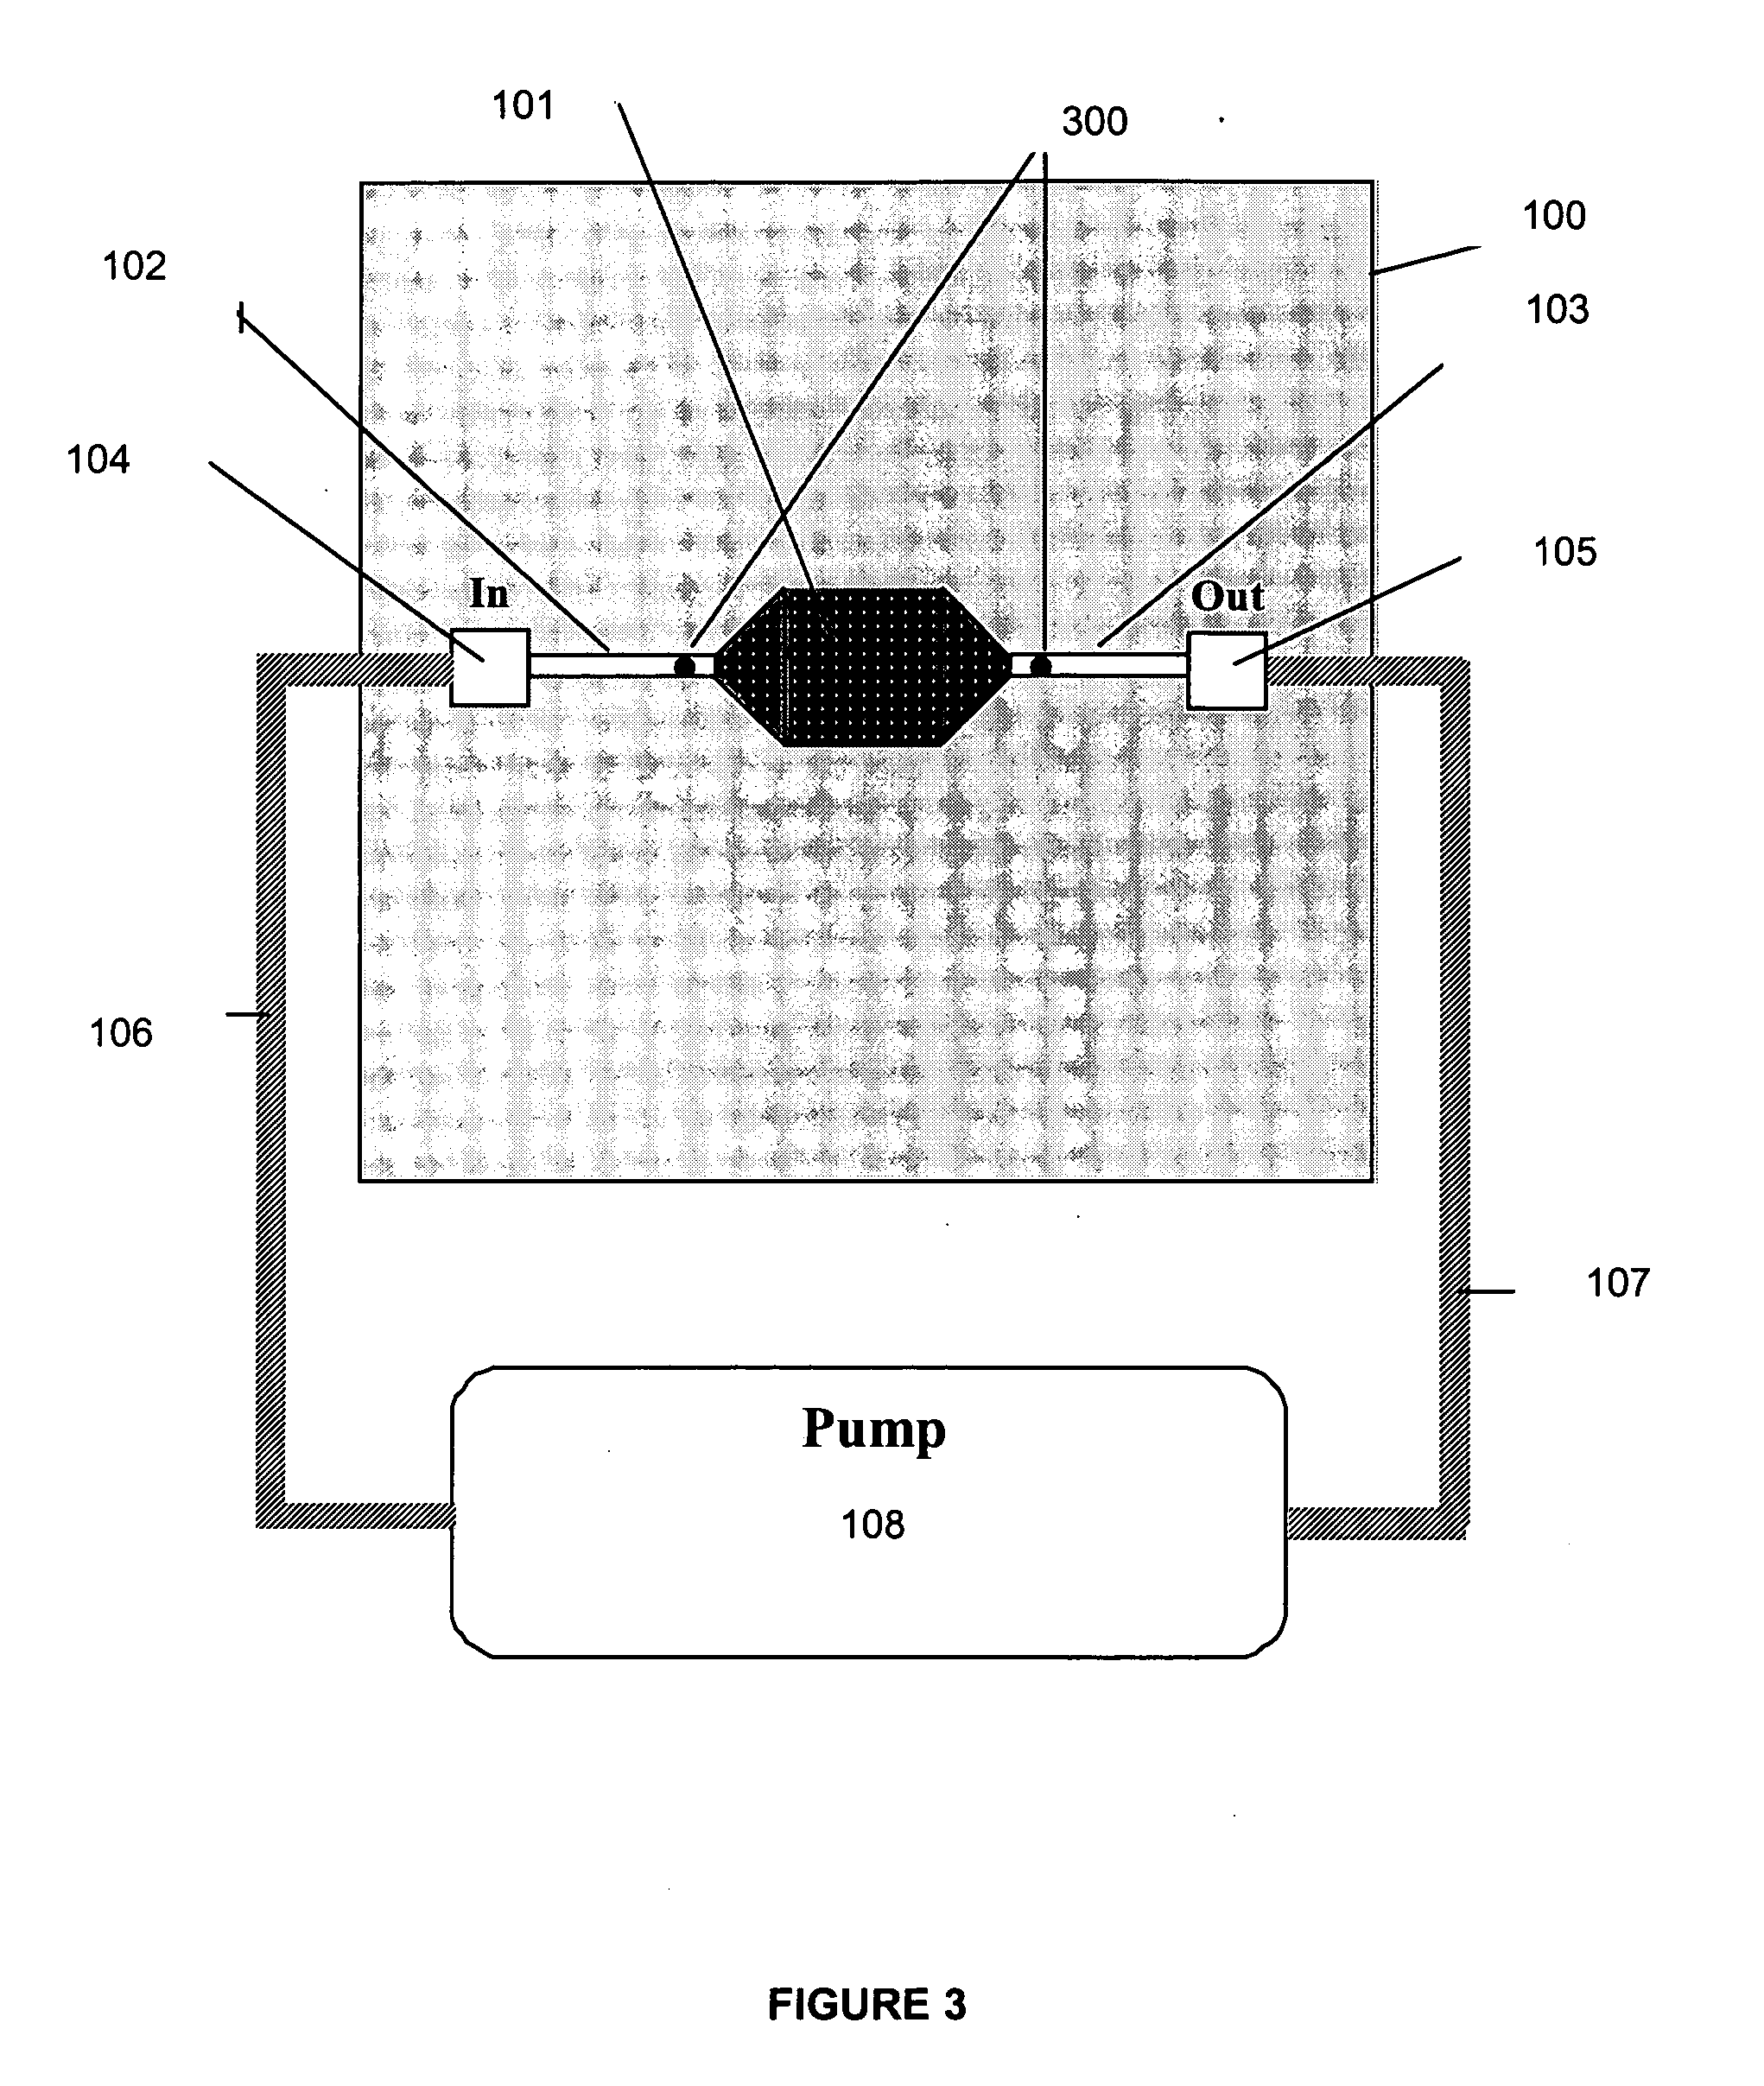 Circulating flow device for assays of cell cultures, cellular components and cell products